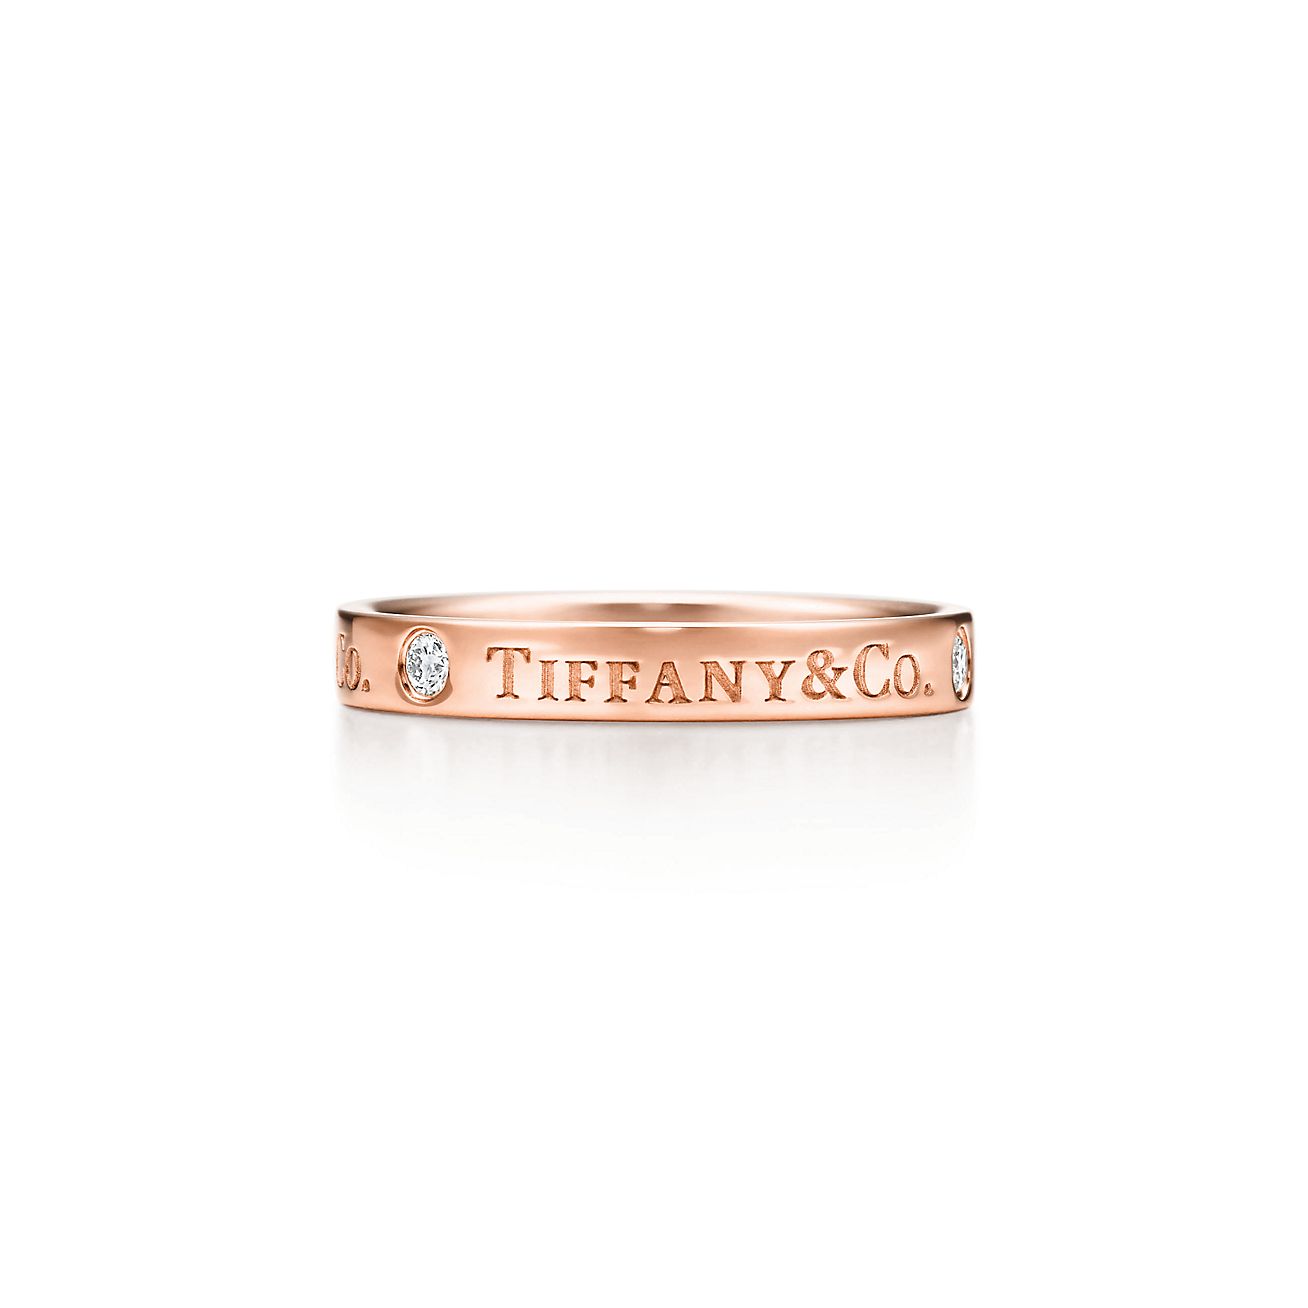 T&CO.® band ring in 18k rose gold with diamonds, 3 mm wide